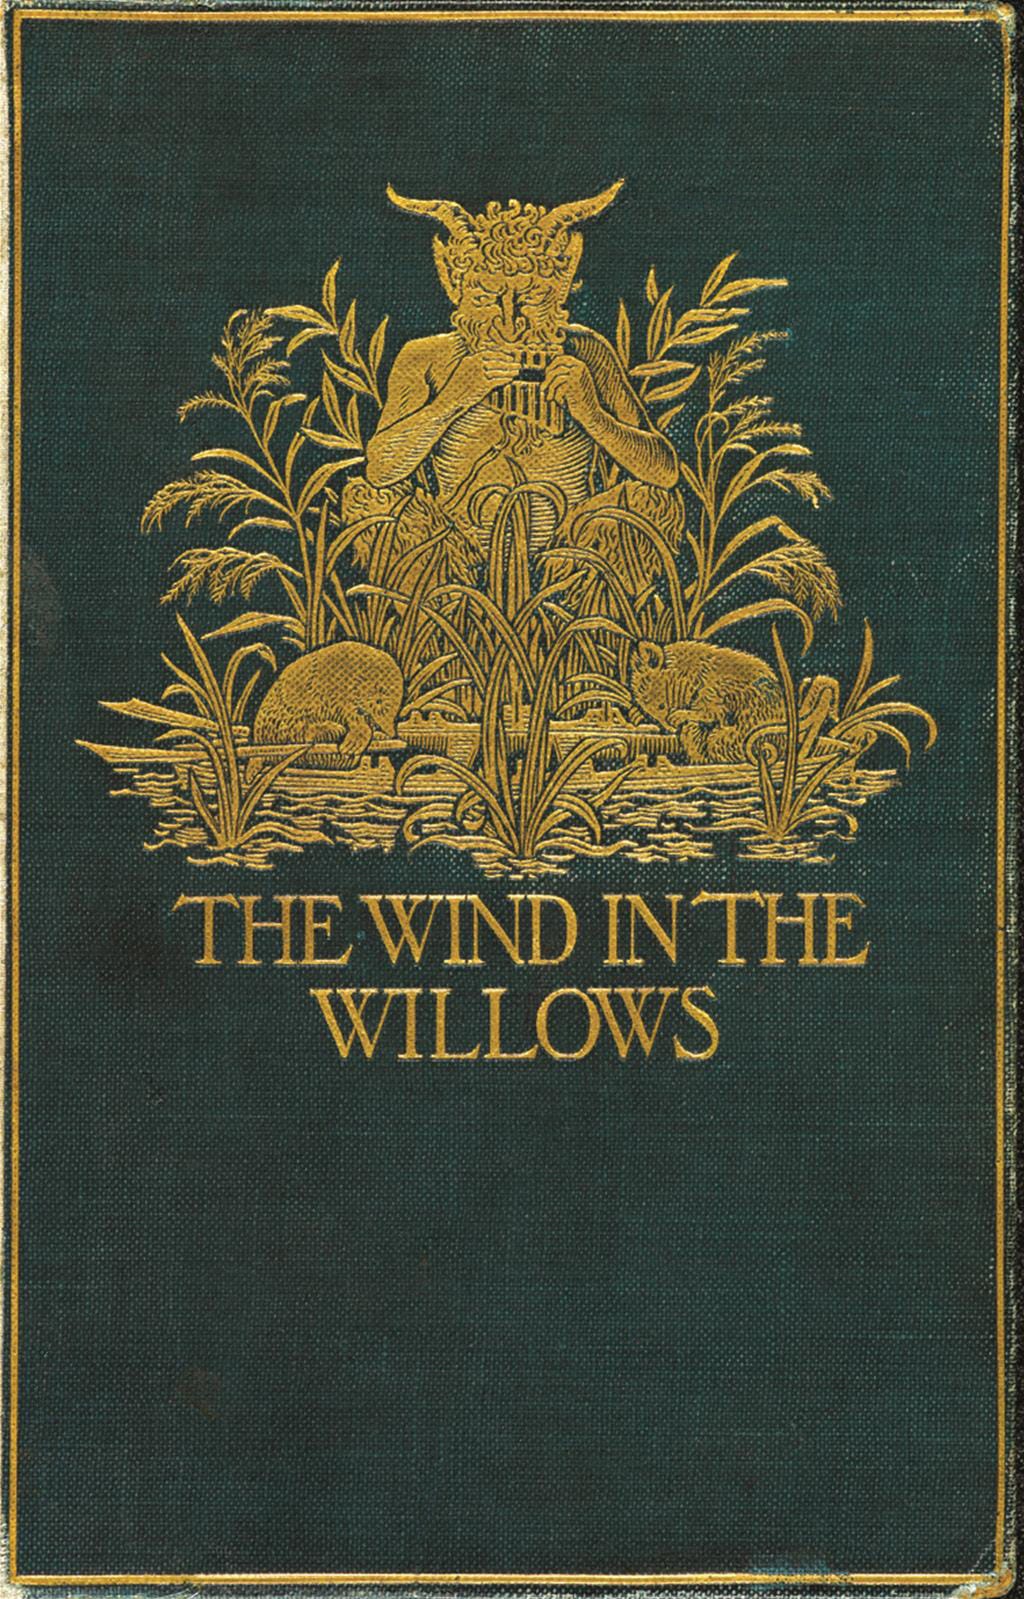 The Project Gutenberg eBook of The Wind in the Willows, by Kenneth Grahame